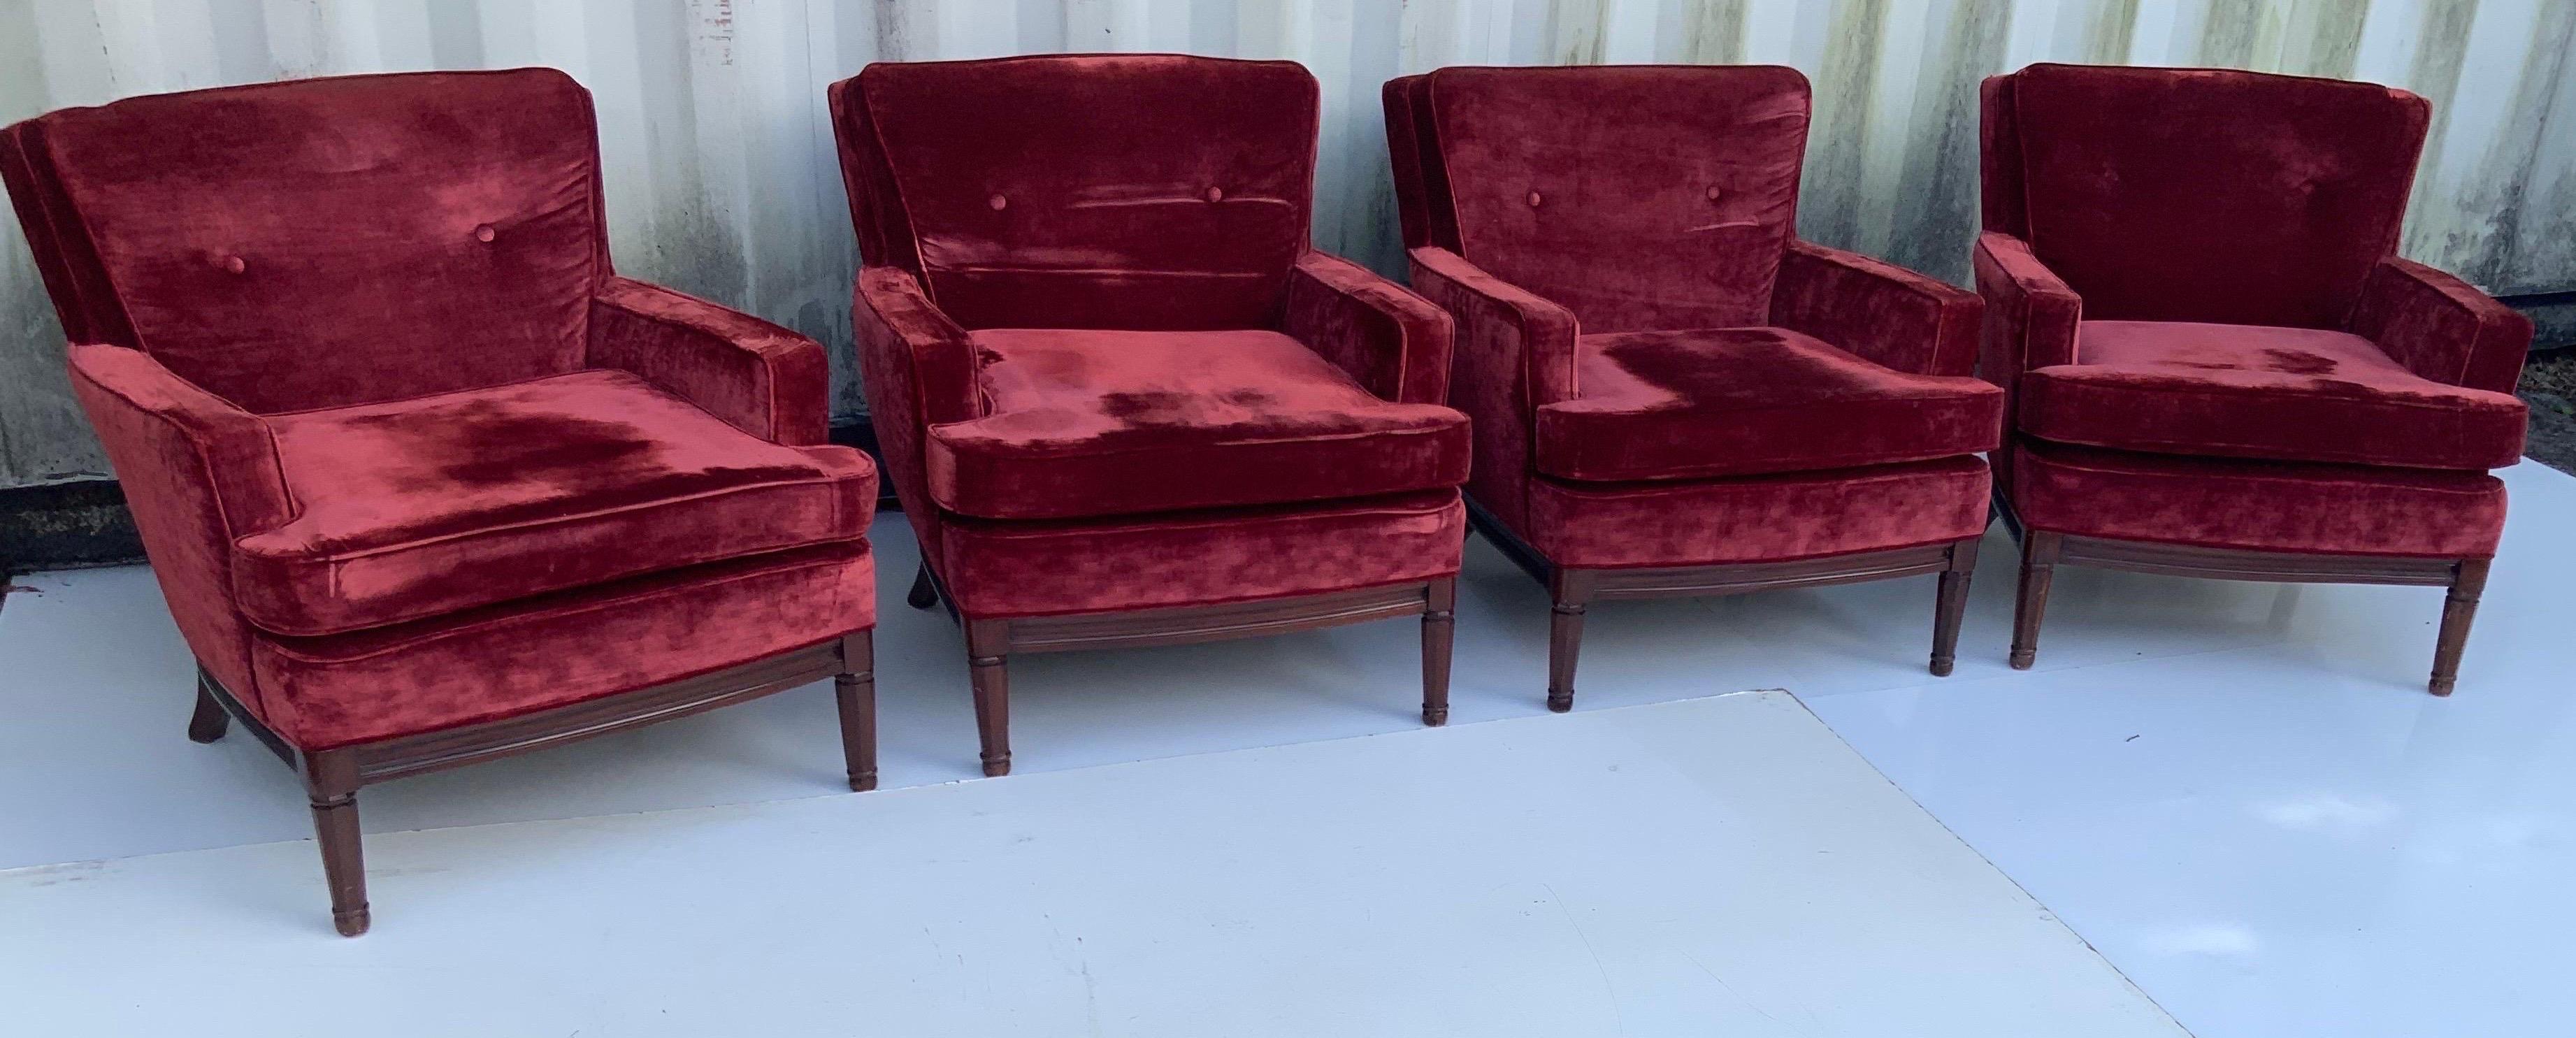 Pair of Neoclassical Maison Jansen Lounge Chairs circa 1960, 2 Pairs Available For Sale 9